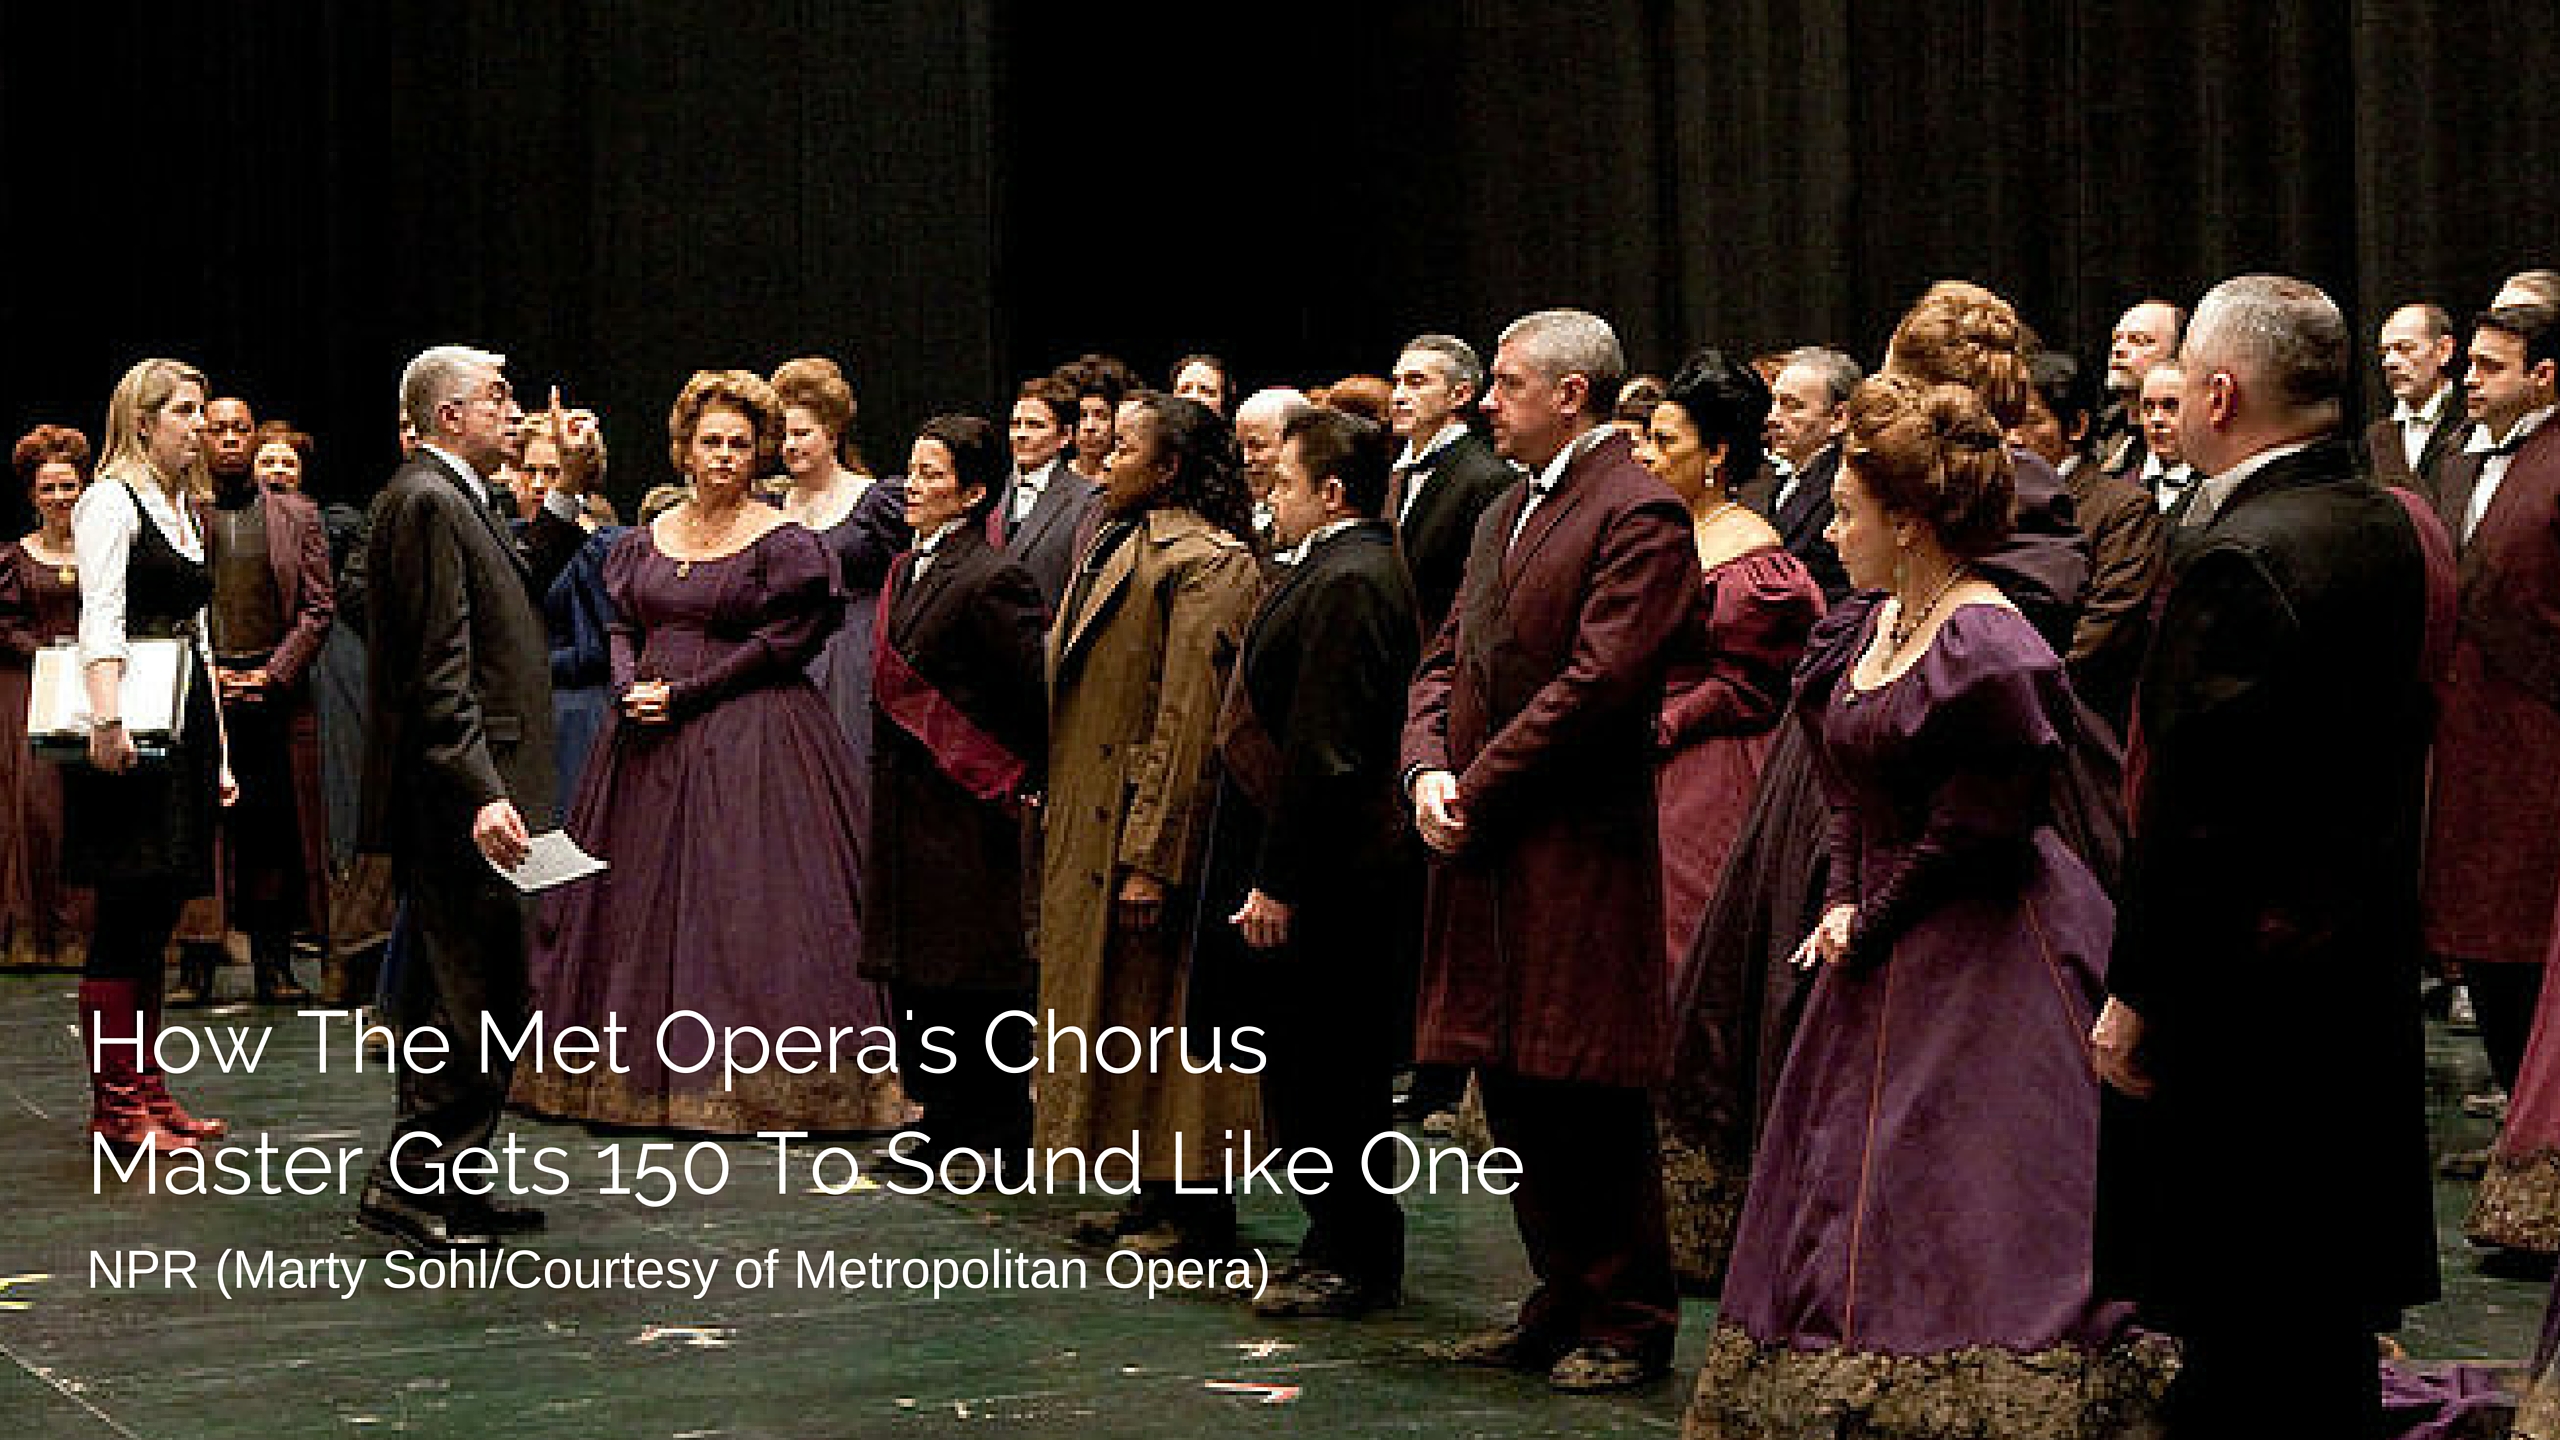 How The Met Opera's Chorus Master Gets 150 To Sound Like One